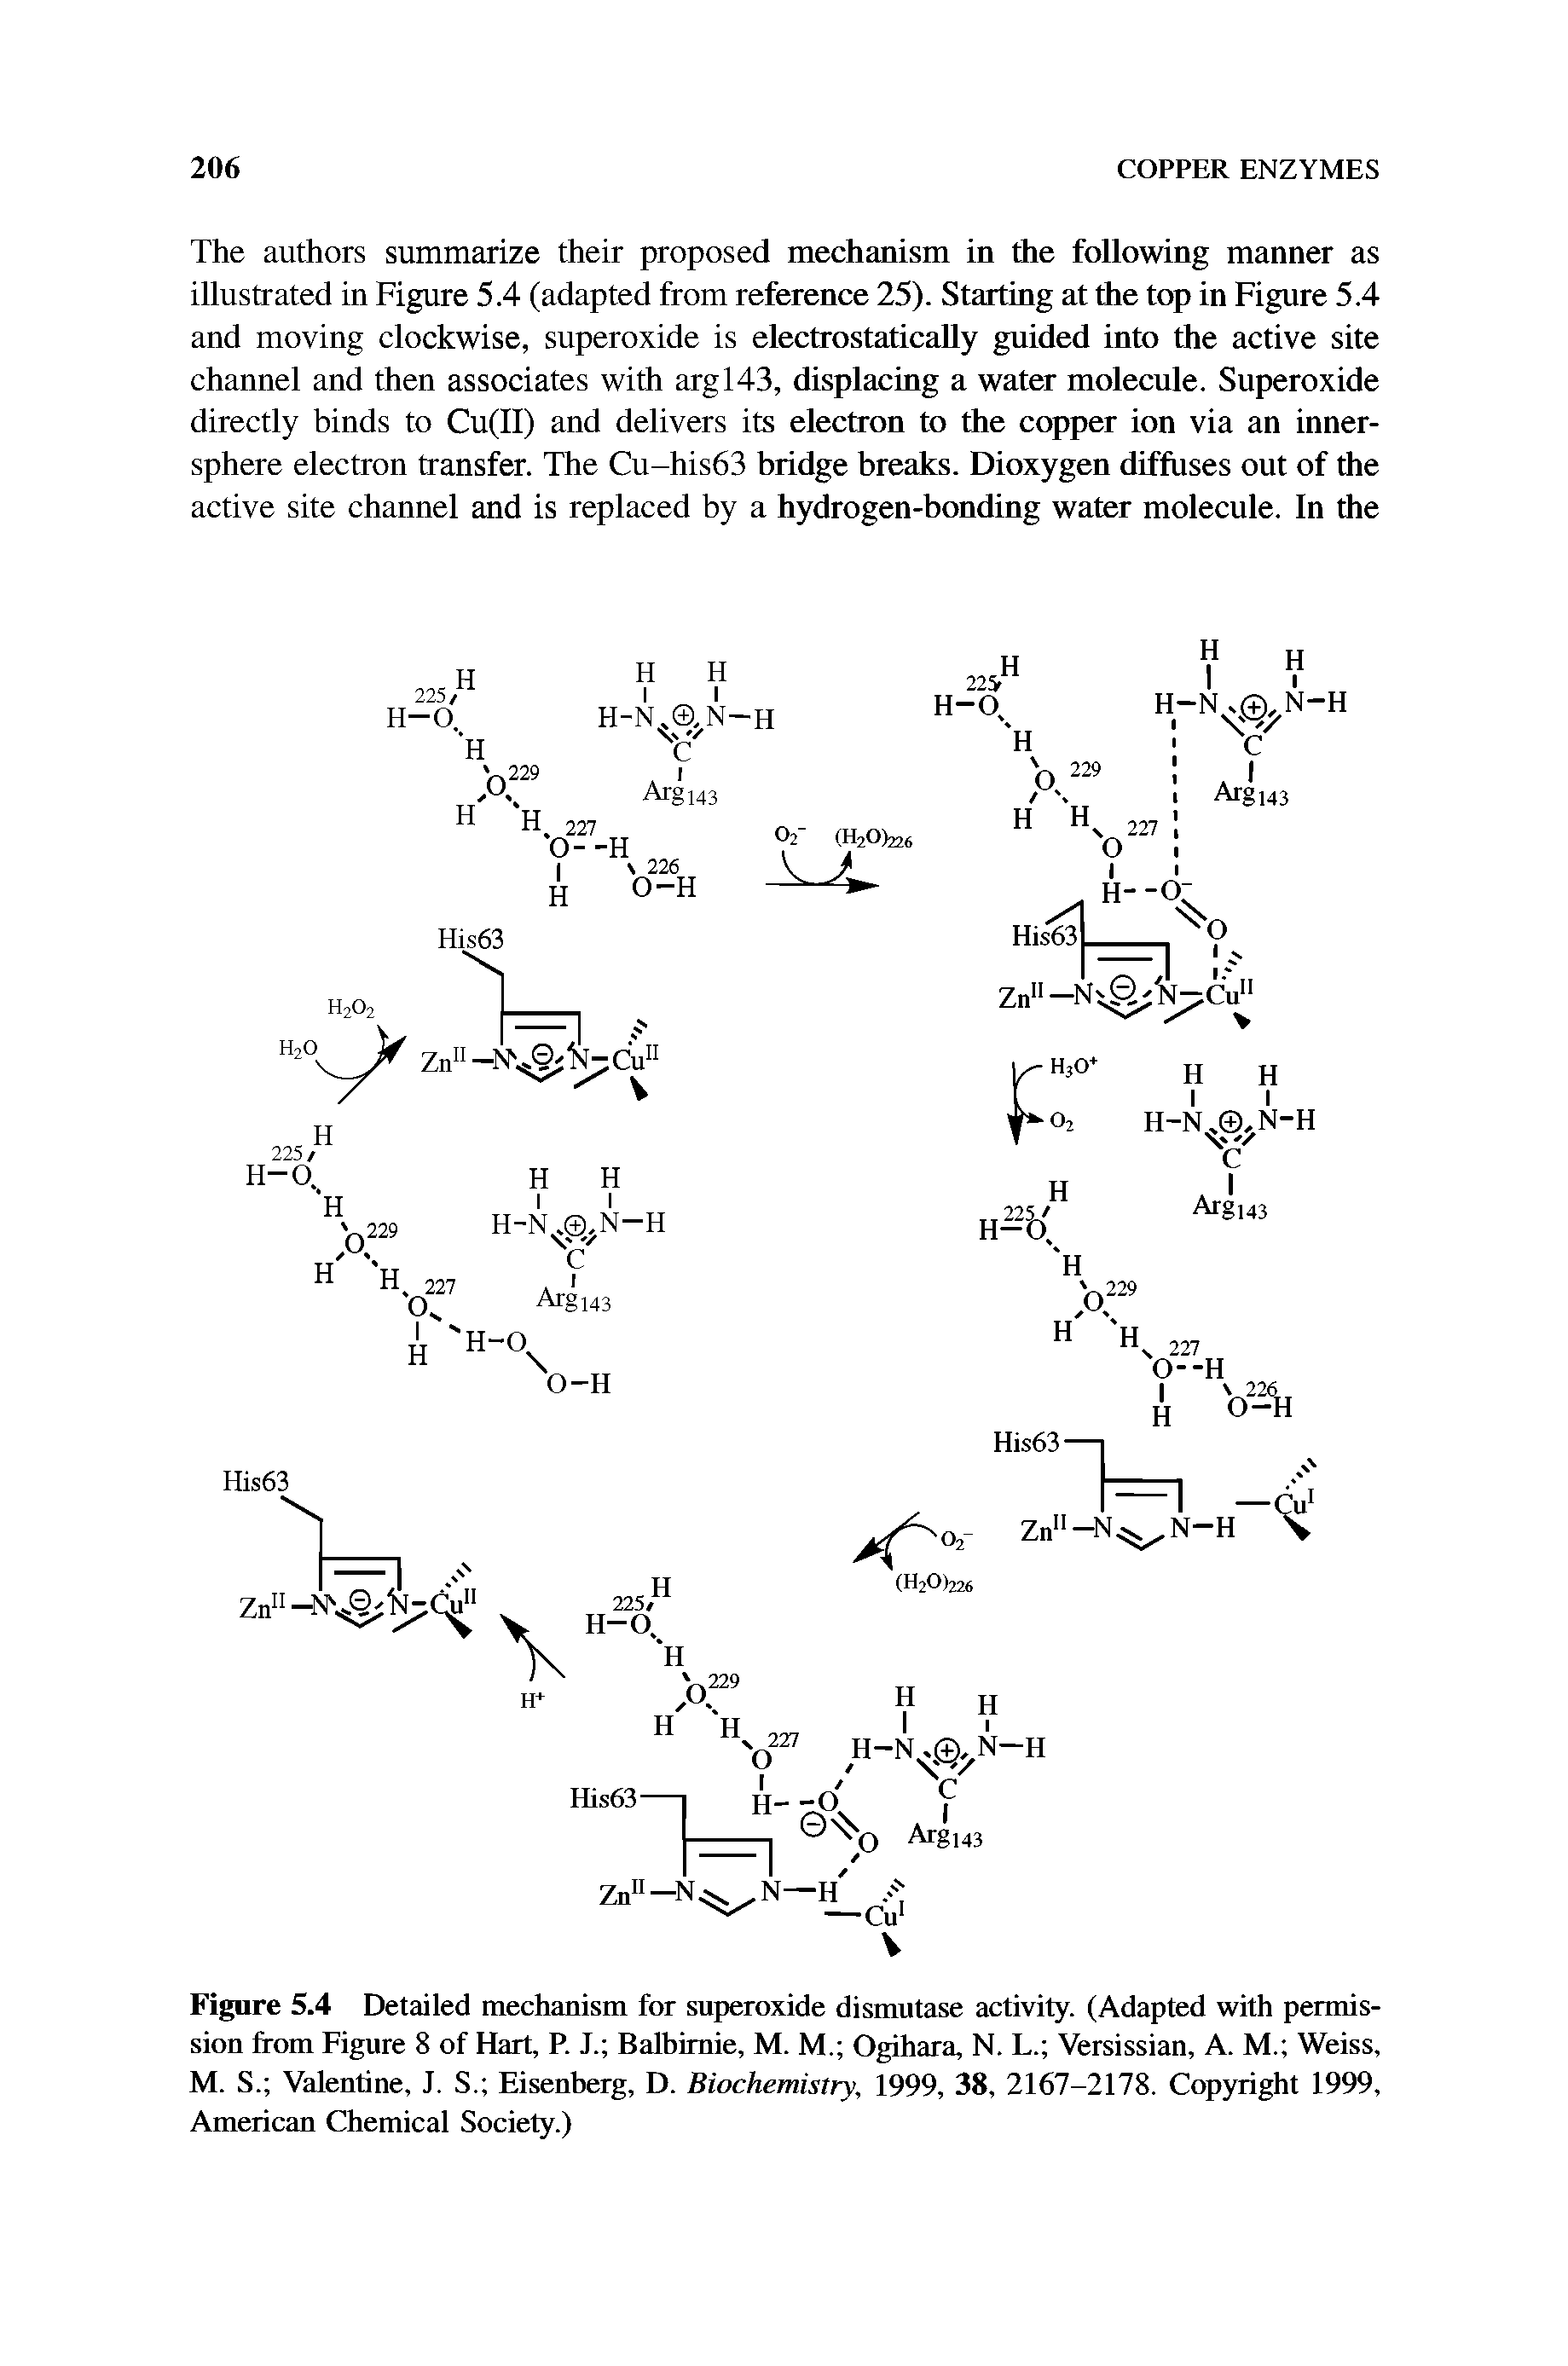 Figure 5.4 Detailed mechanism for superoxide dismutase activity. (Adapted with permission from Figure 8 of Hart, P. J. Balbimie, M. M. Ogihara, N. L. Versissian, A. M. Weiss, M. S. Valentine, J. S. Eisenberg, D. Biochemistry, 1999, 38, 2167-2178. Copyright 1999, American Chemical Society.)...